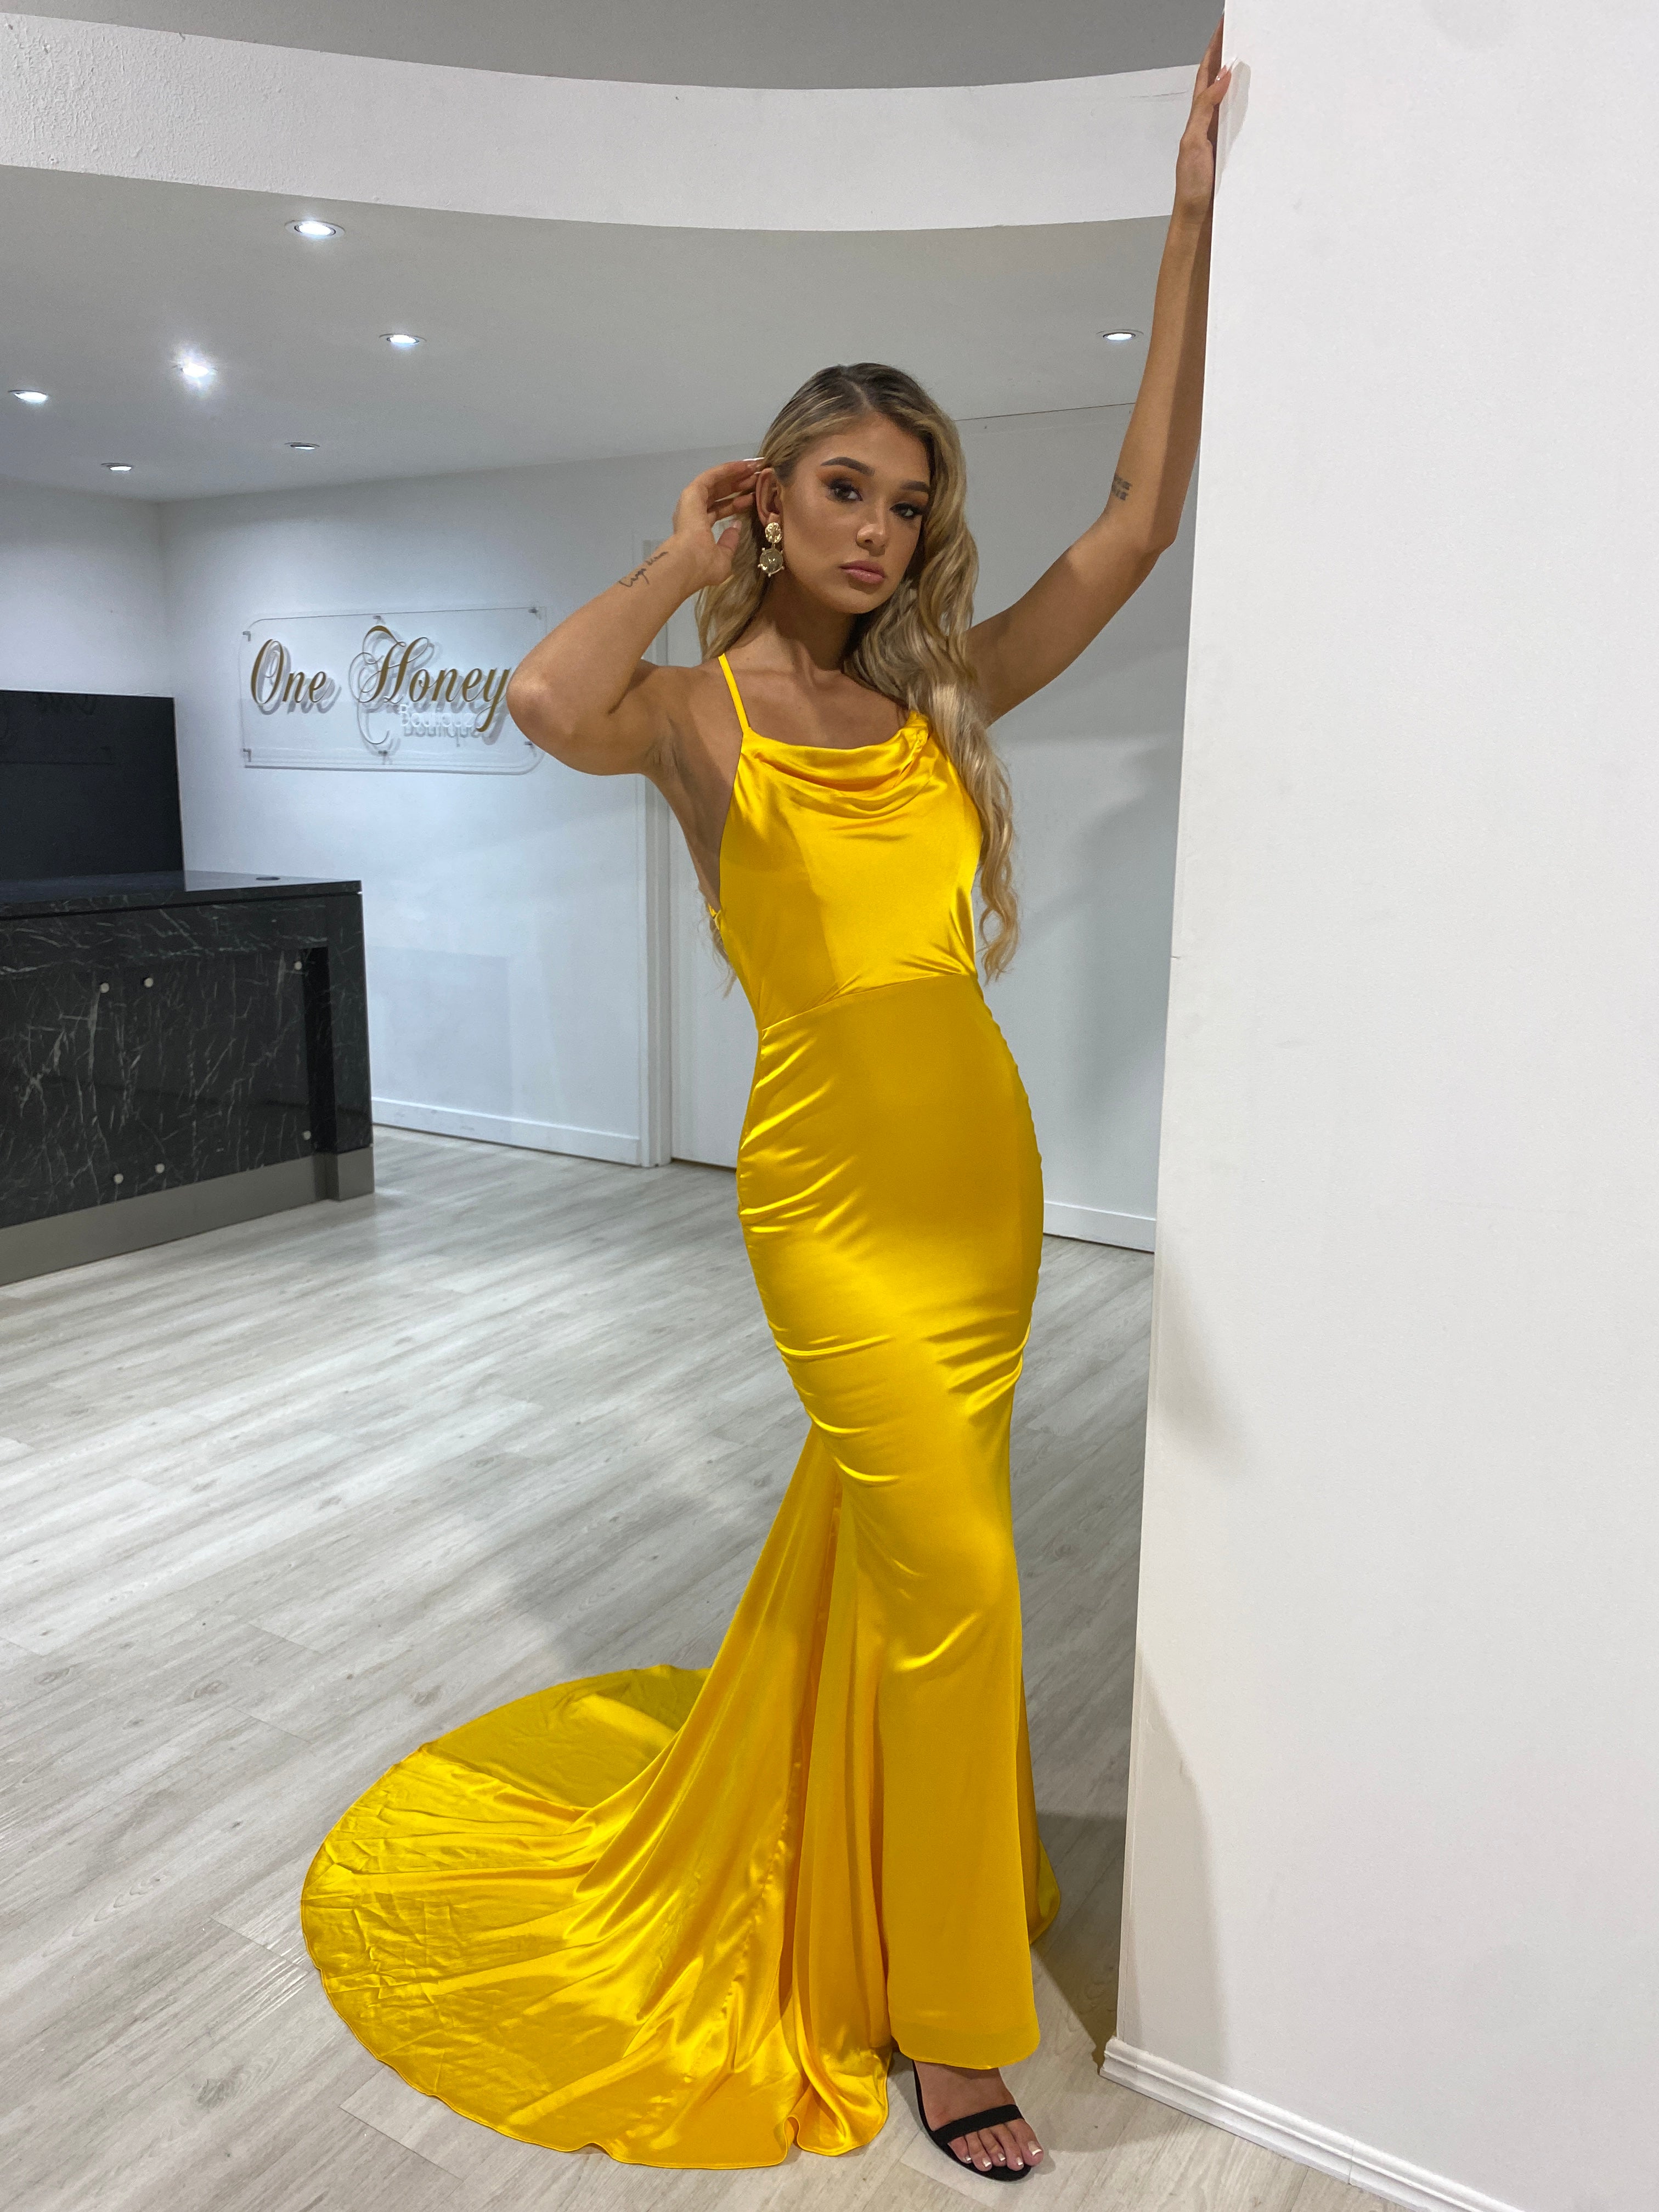 Honey Couture CANDICE Yellow Silky Low Back Mermaid Formal Dress